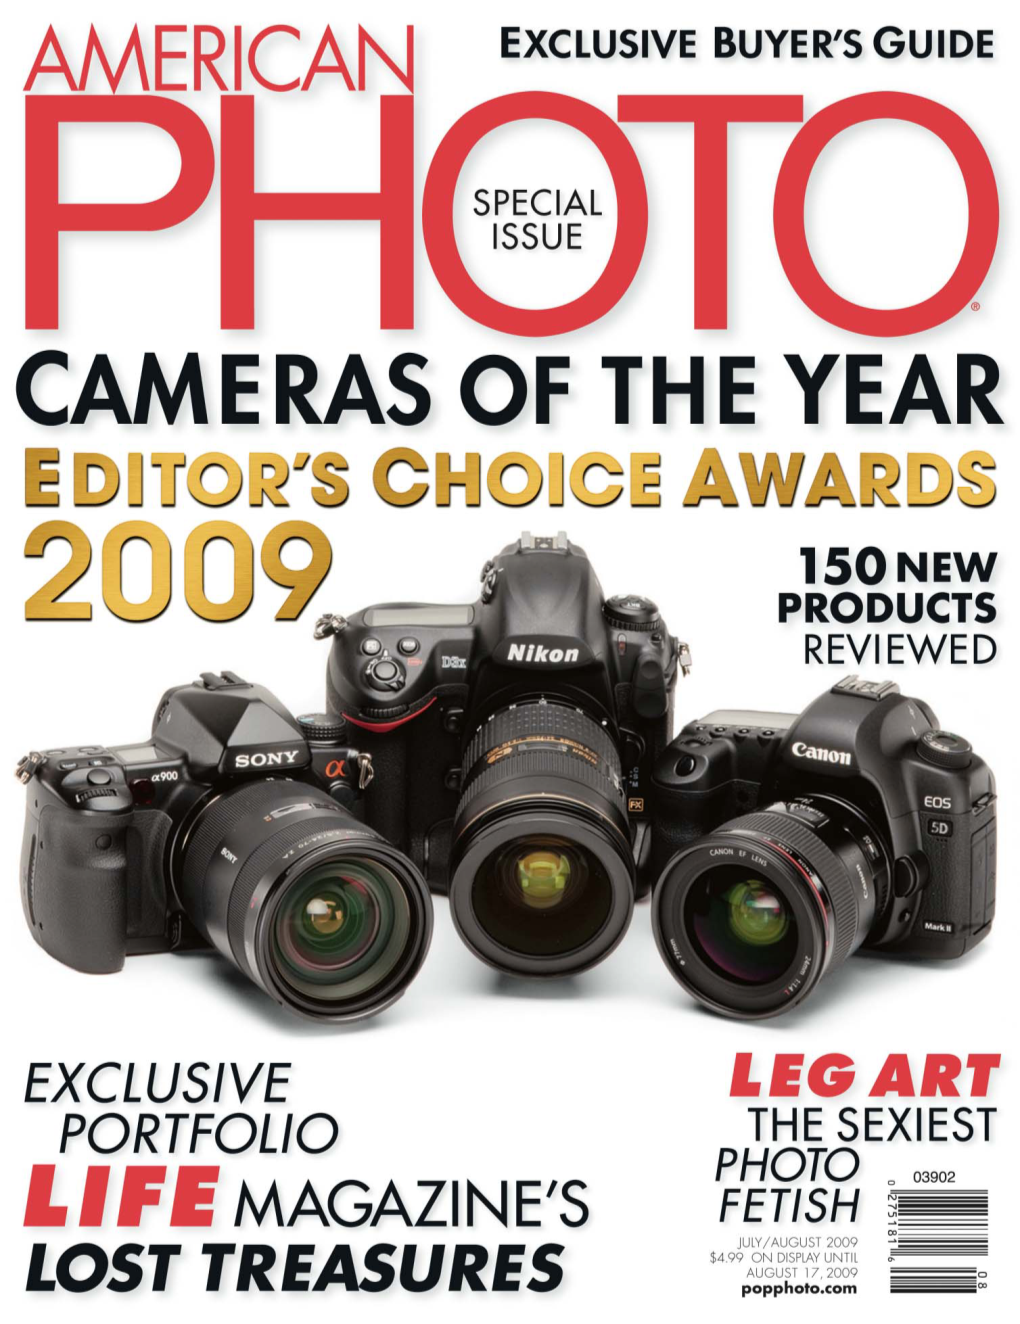 Cameras of the Year